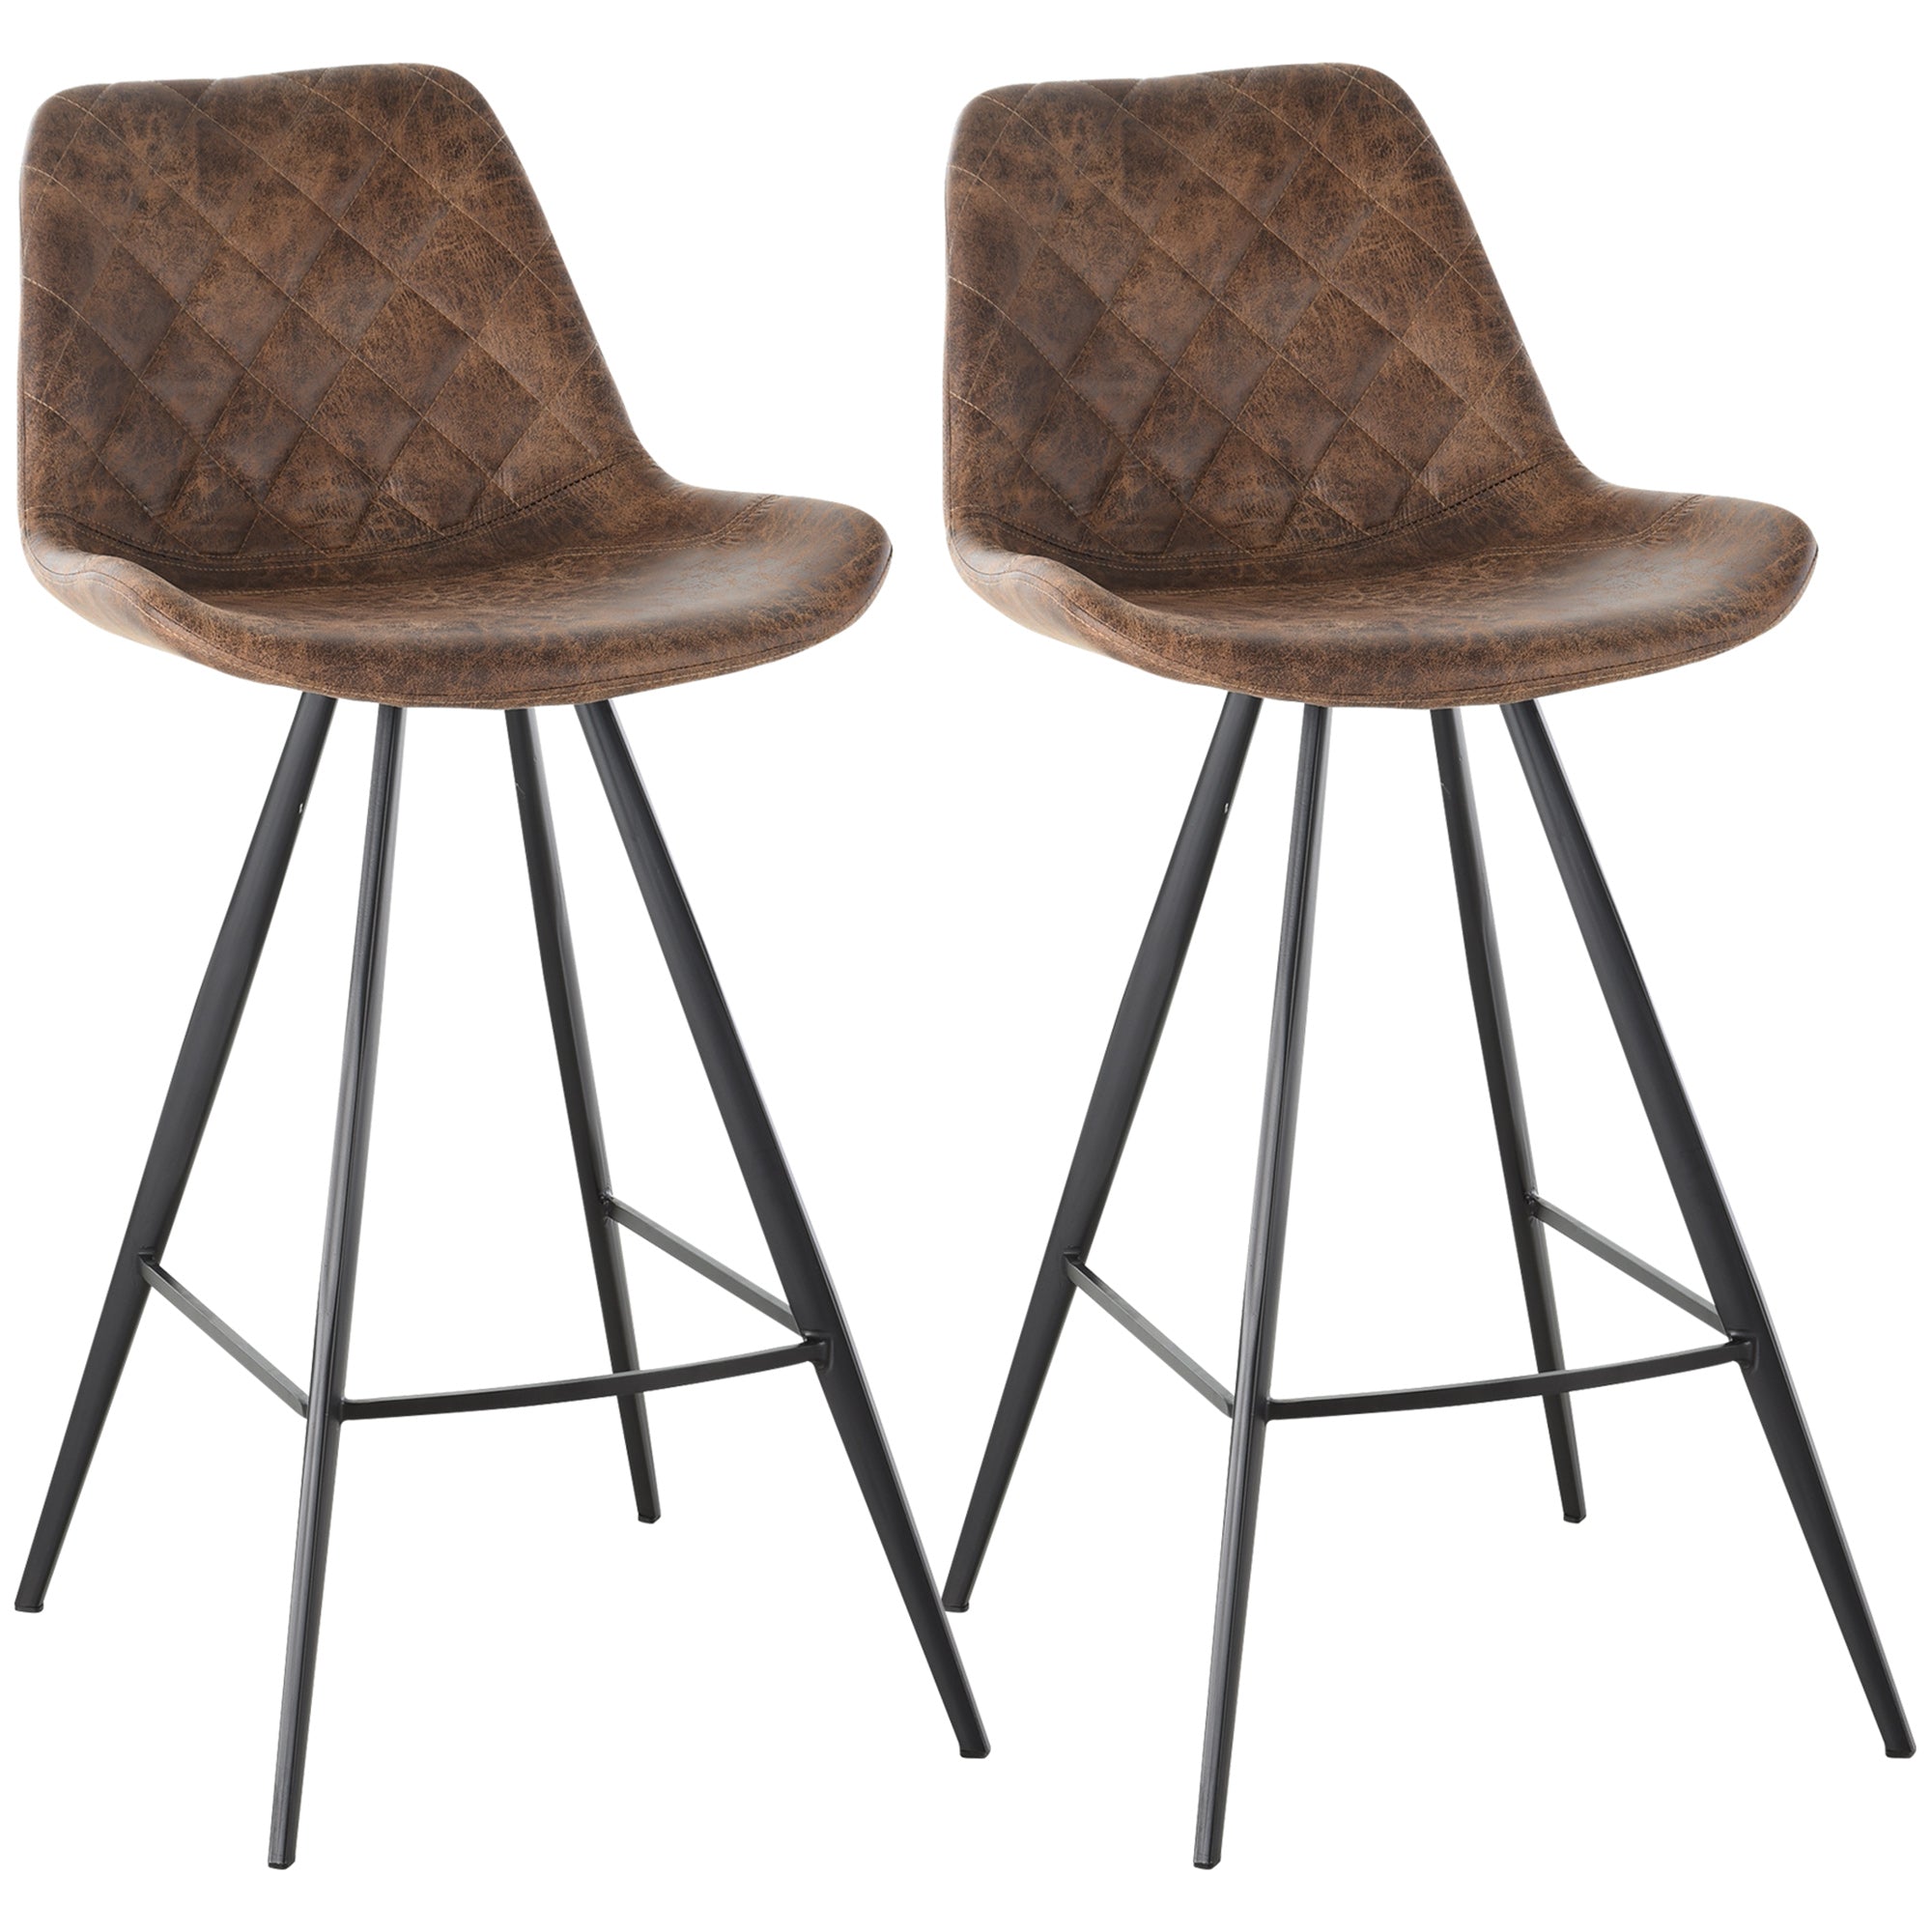 Set Of 2 Bar Stools Vintage Microfiber Cloth Tub Seats Padded Comfortable Steel Frame Footrest Quilted Home Cafe Kitchen Chair Stylish Brown  AOSOM   